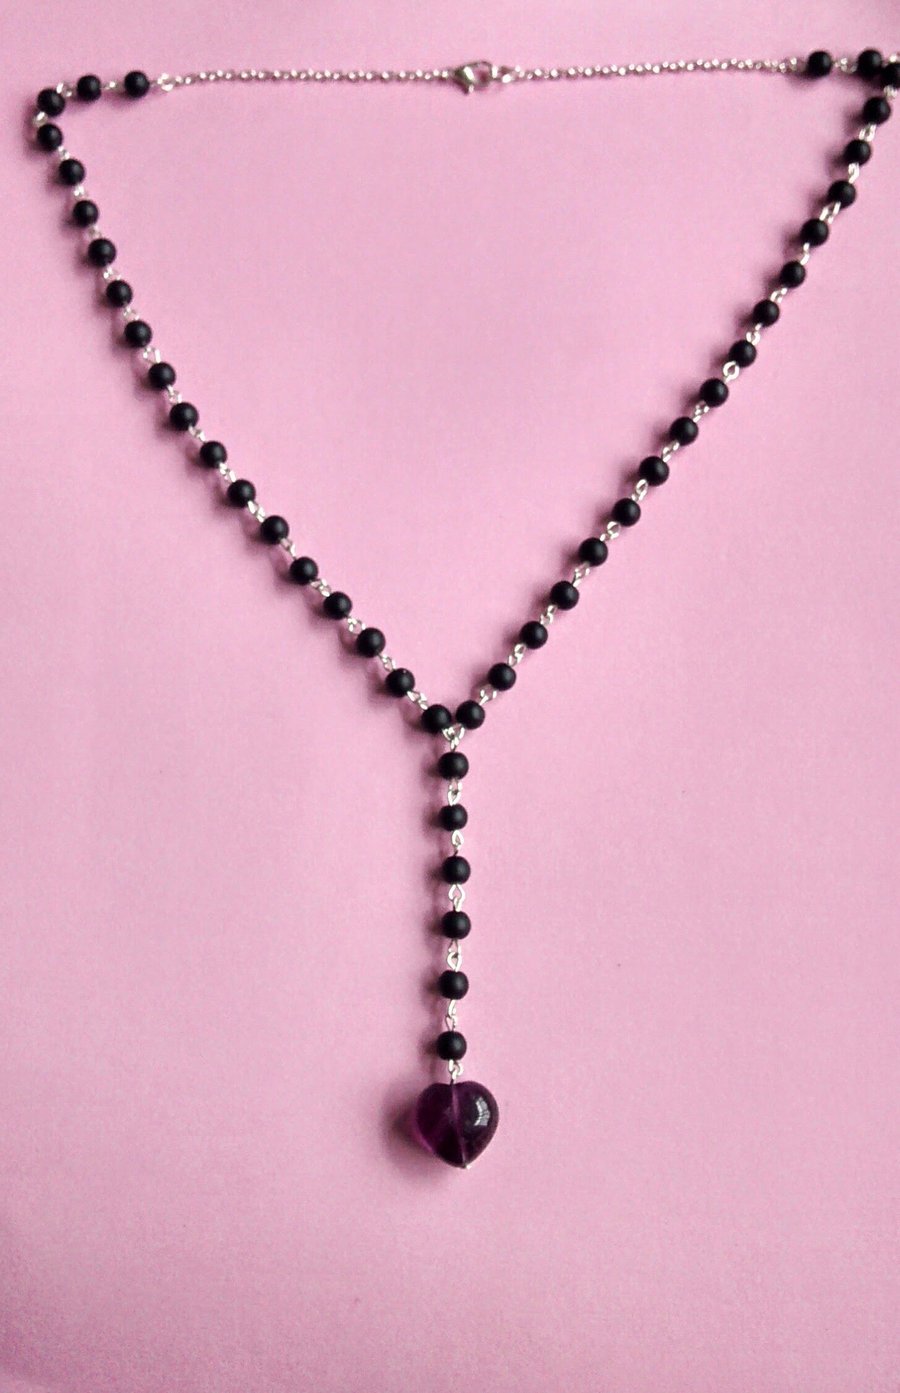 Black Beaded Y-shaped Rosary Style Necklace with Amethyst Heart